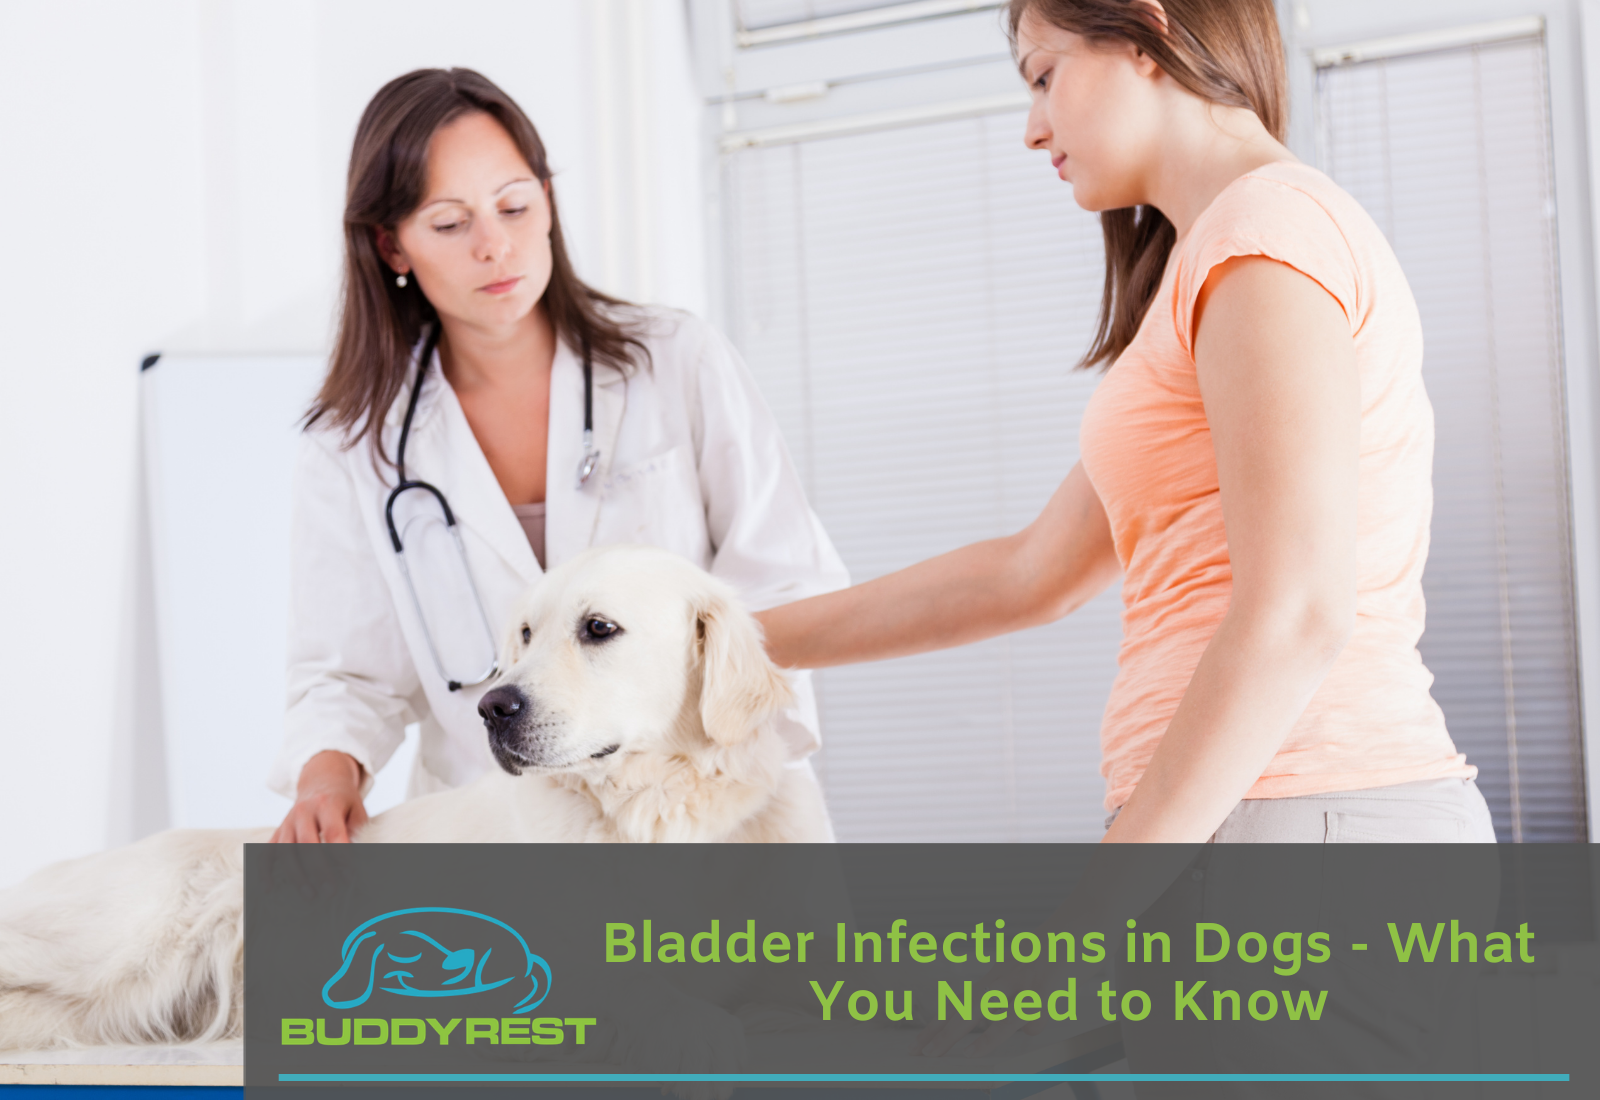 Bladder Infections in Dogs - What You Need to Know